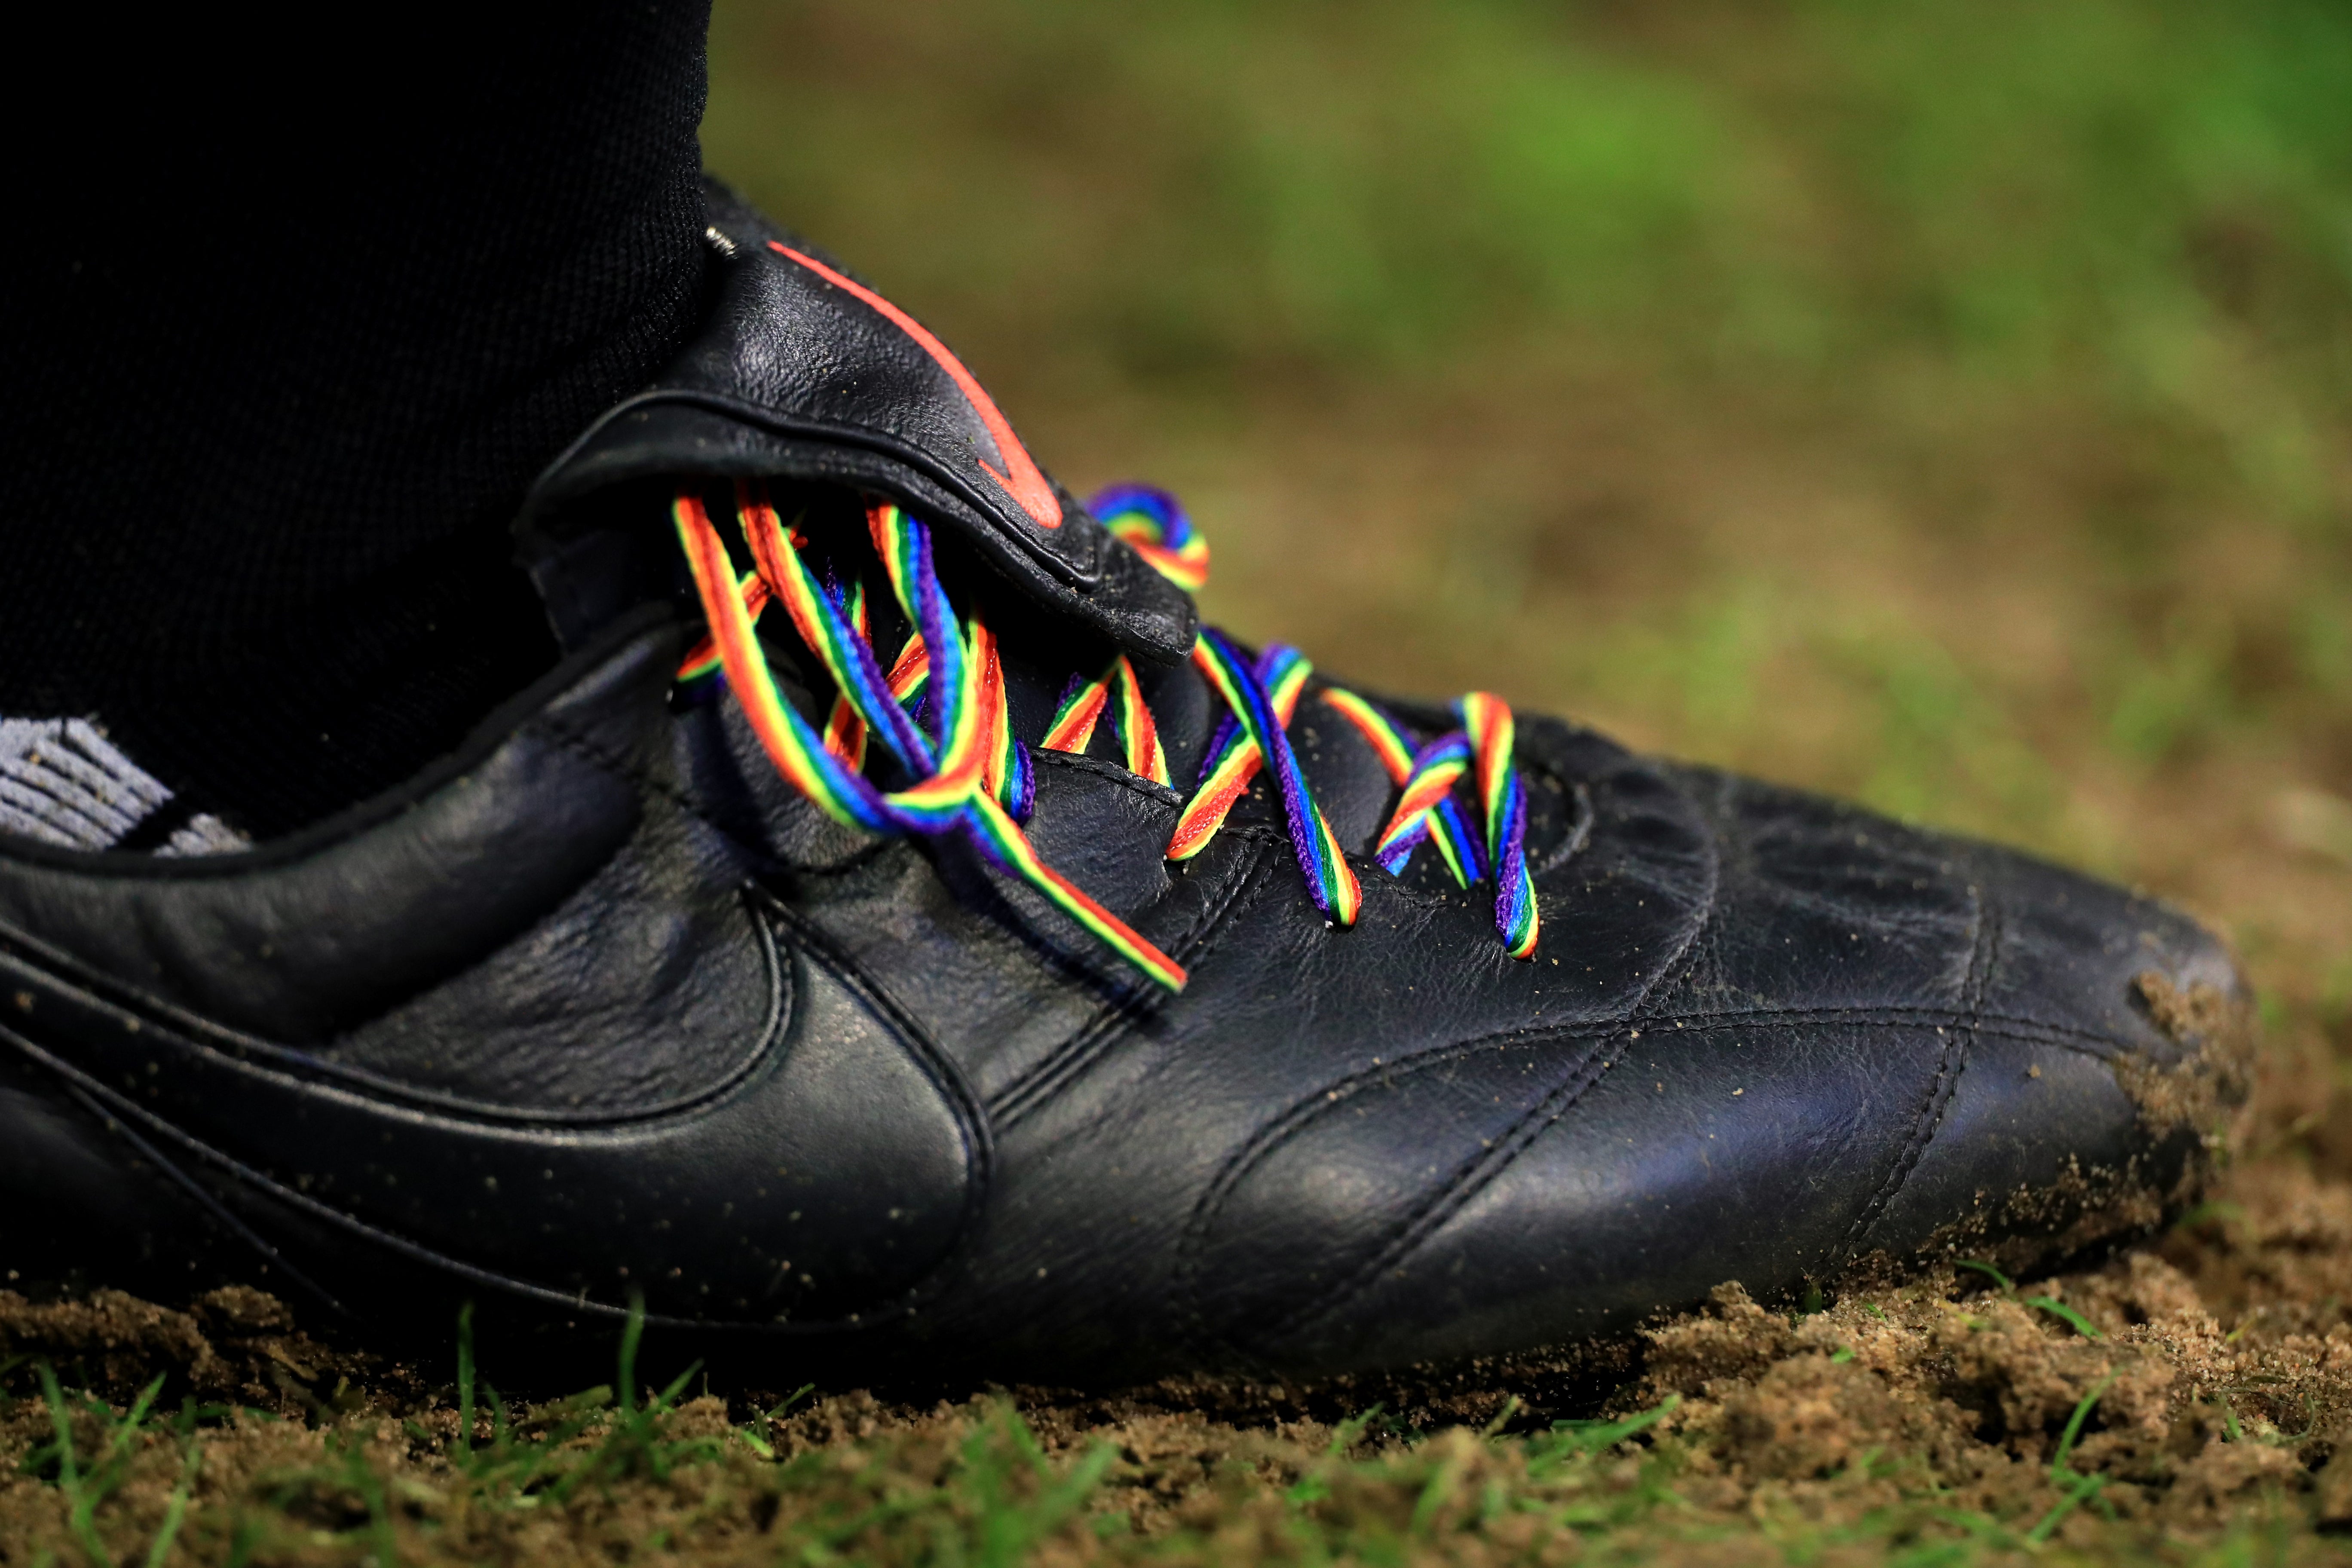 Stonewall’s Rainbow Laces campaign has helped shine a light on homophobia in football. (Mike Egerton/PA)